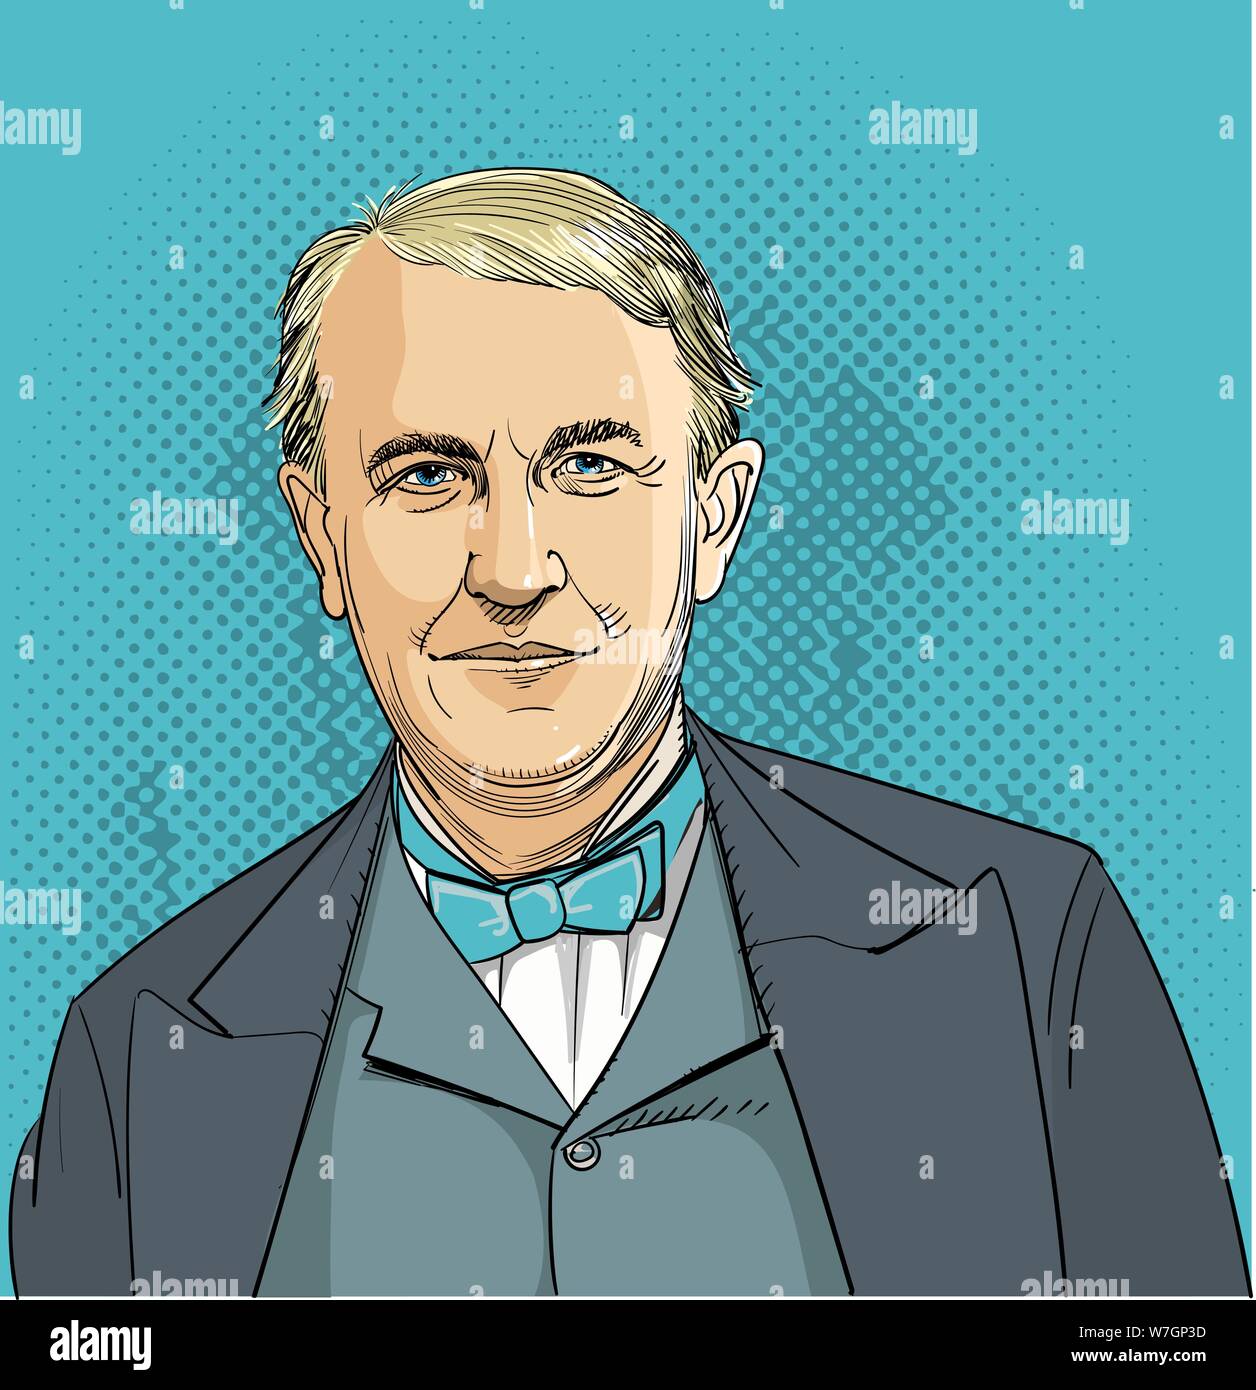 Thomas Edison (1847-1931) portrait in line art illustration. He is one of America's greatest inventors that invented the first light bulb, phonograph, Stock Vector